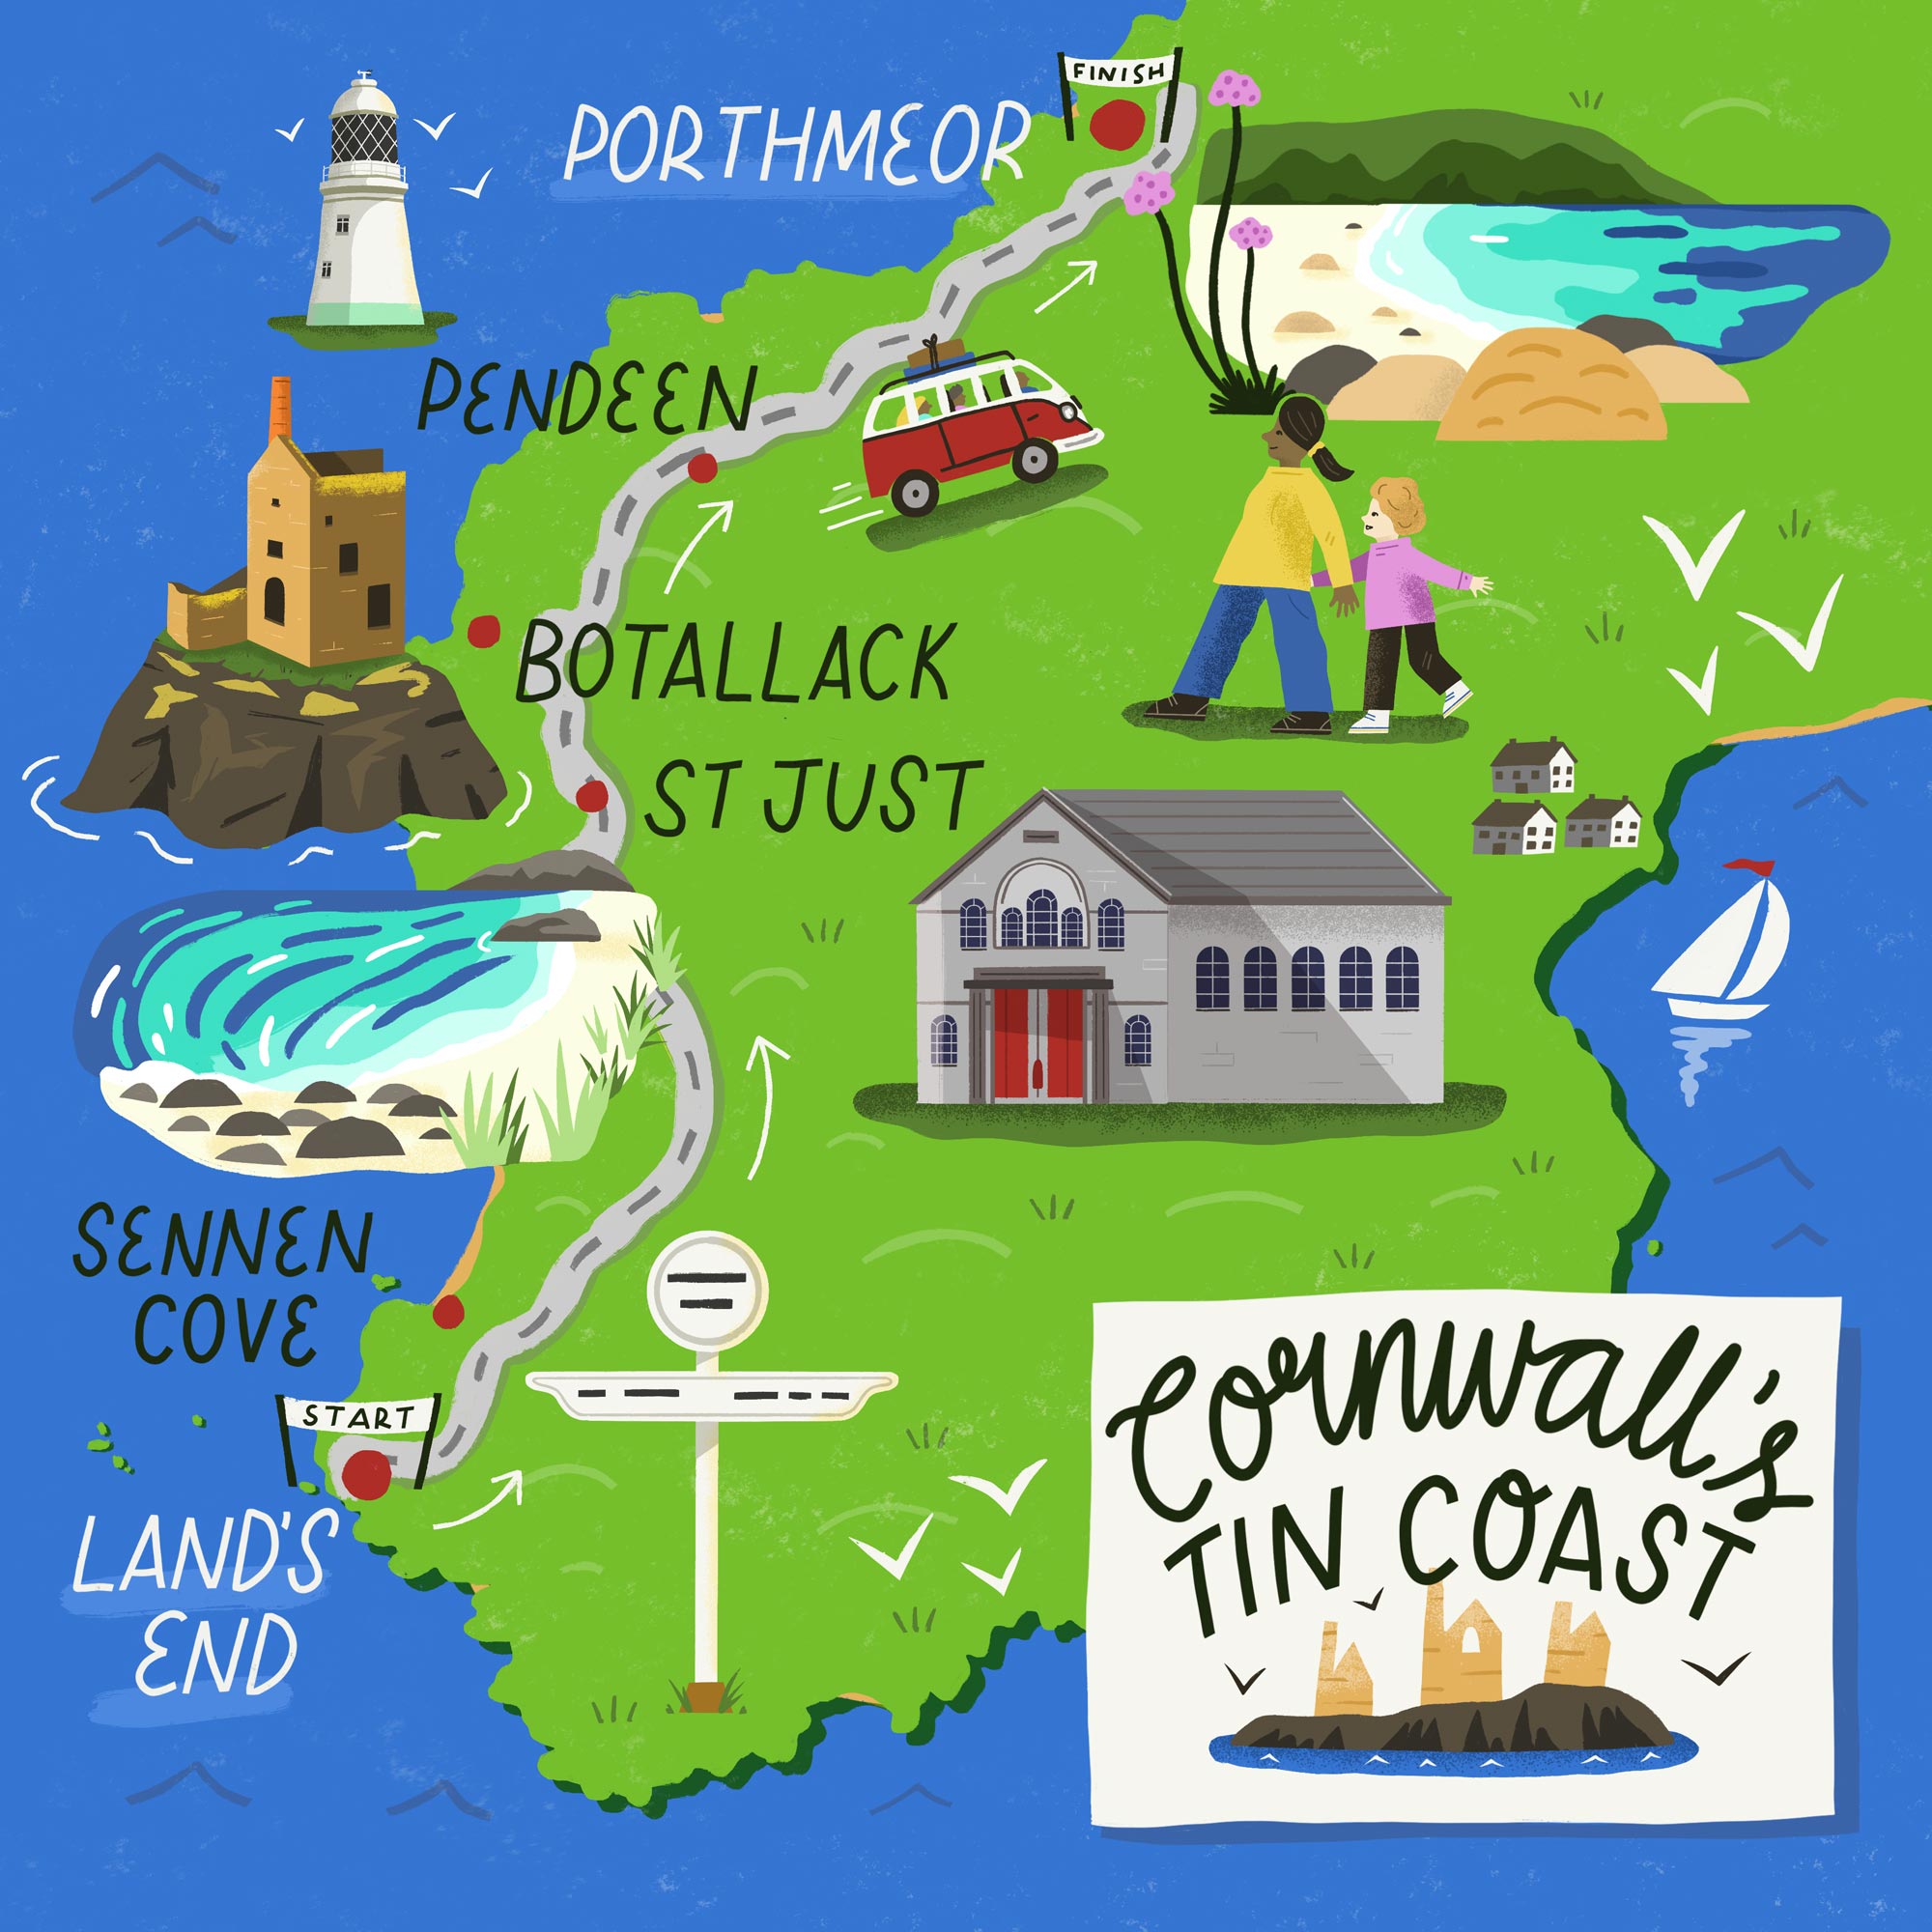 Map of the Tin Coast by Elly Jahnz for Discover Britain